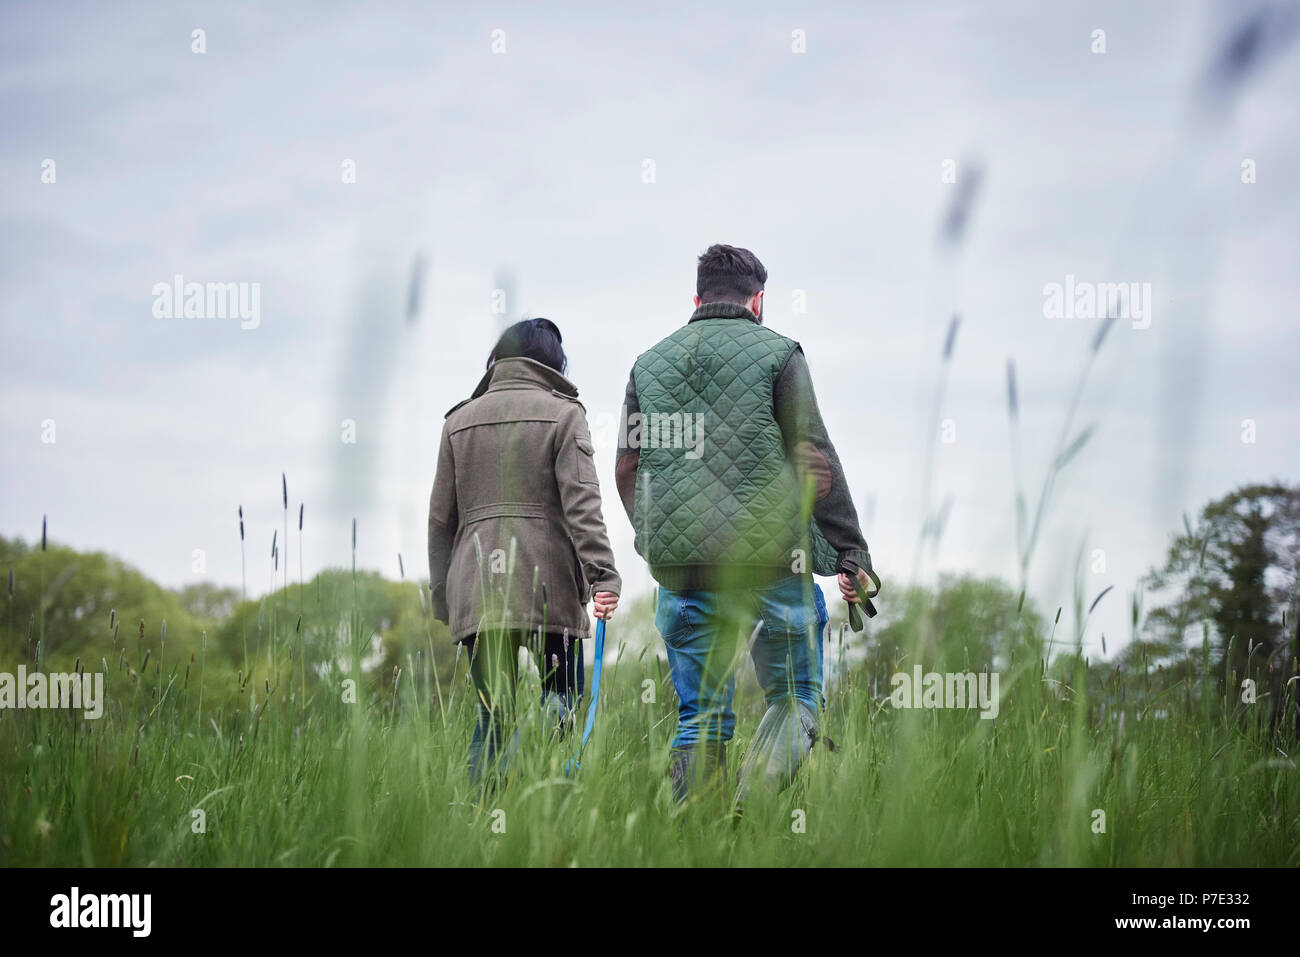 Man and woman walking in field, rear view Stock Photo